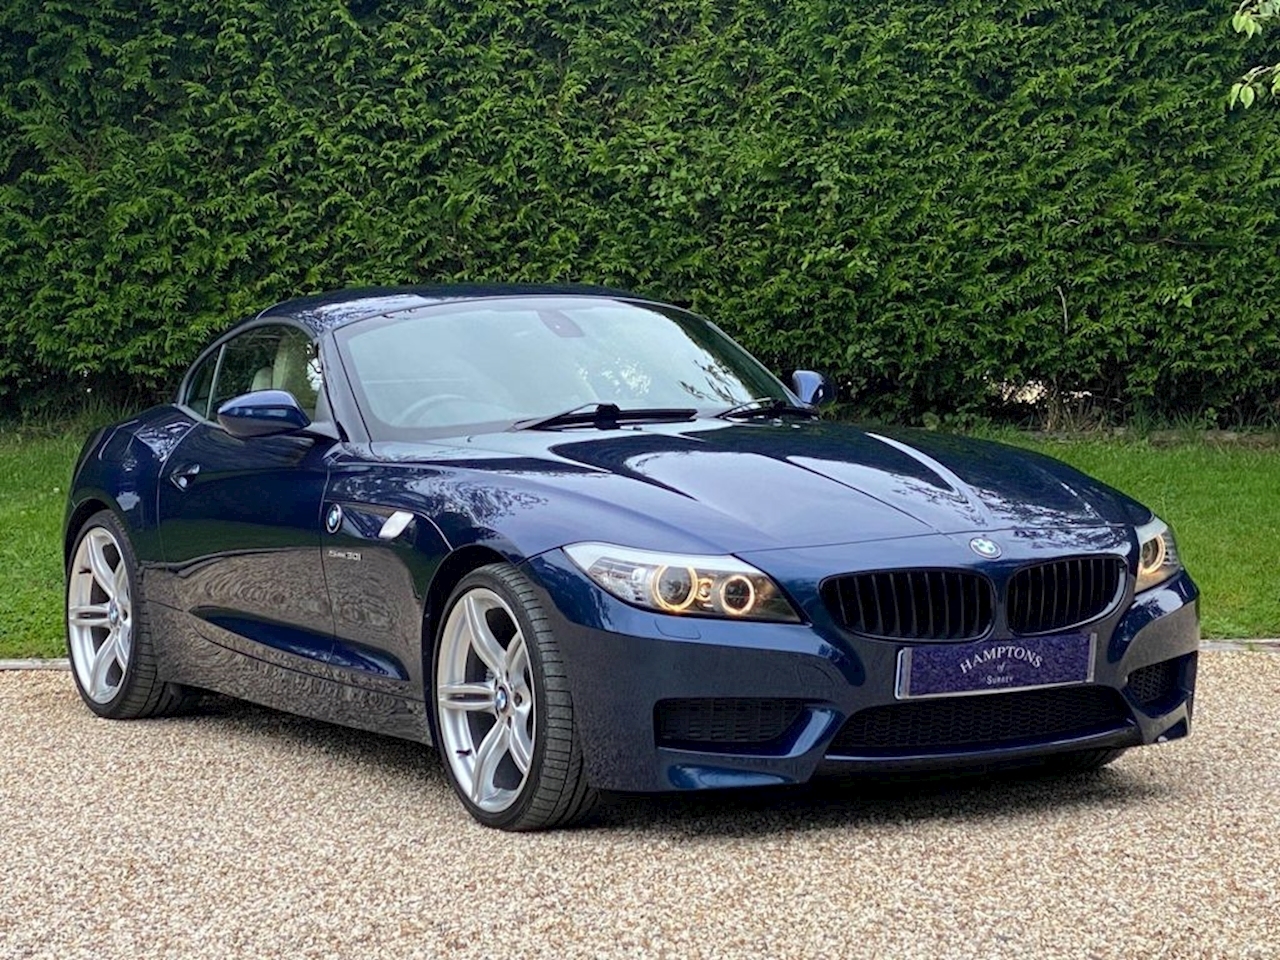 3.0 30i M Sport Highline Edition Convertible 2dr Petrol Automatic sDrive (195 g/km, 258 bhp)